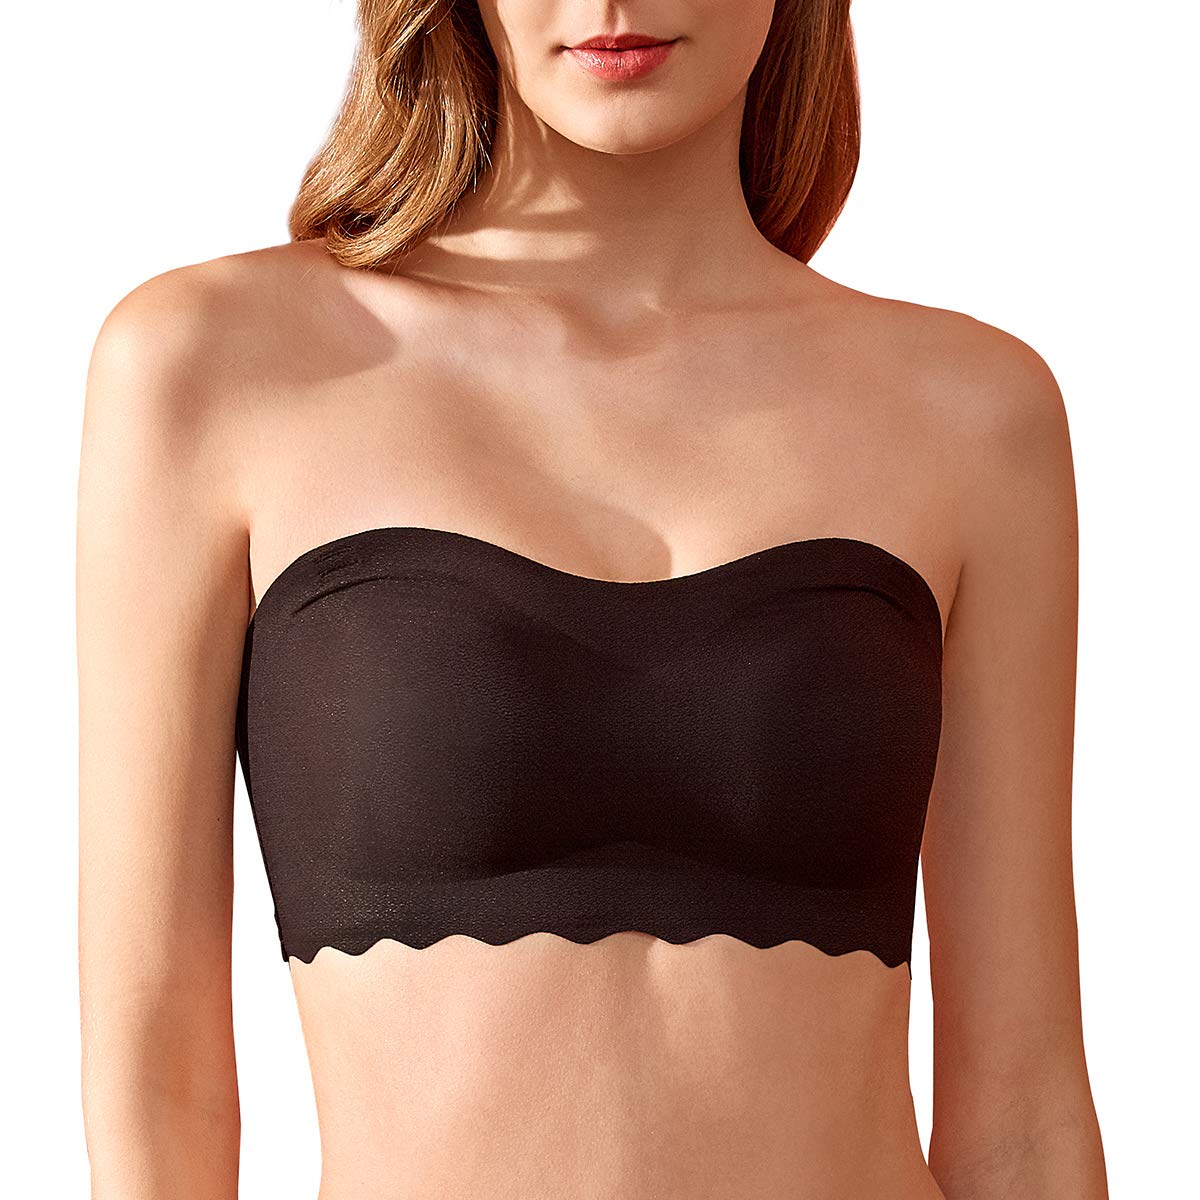 Invisible Strapless Bras for Women Push Up Seamless Bandeau Bra